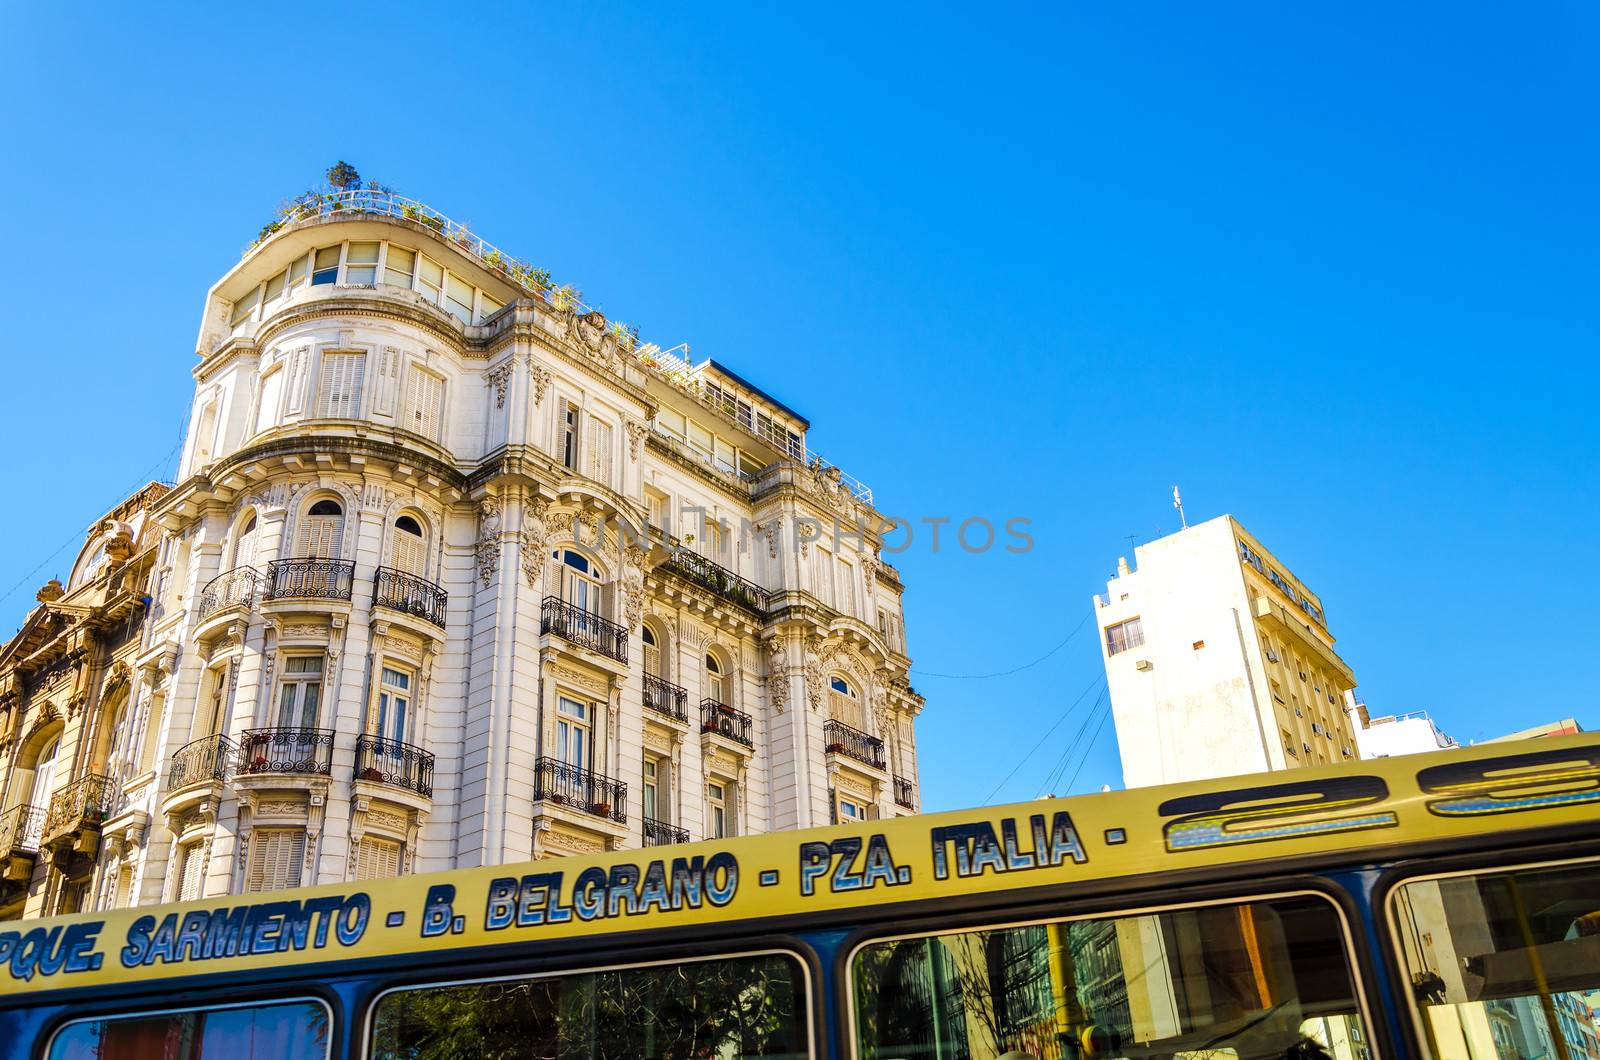 Bus and Architecture by jkraft5